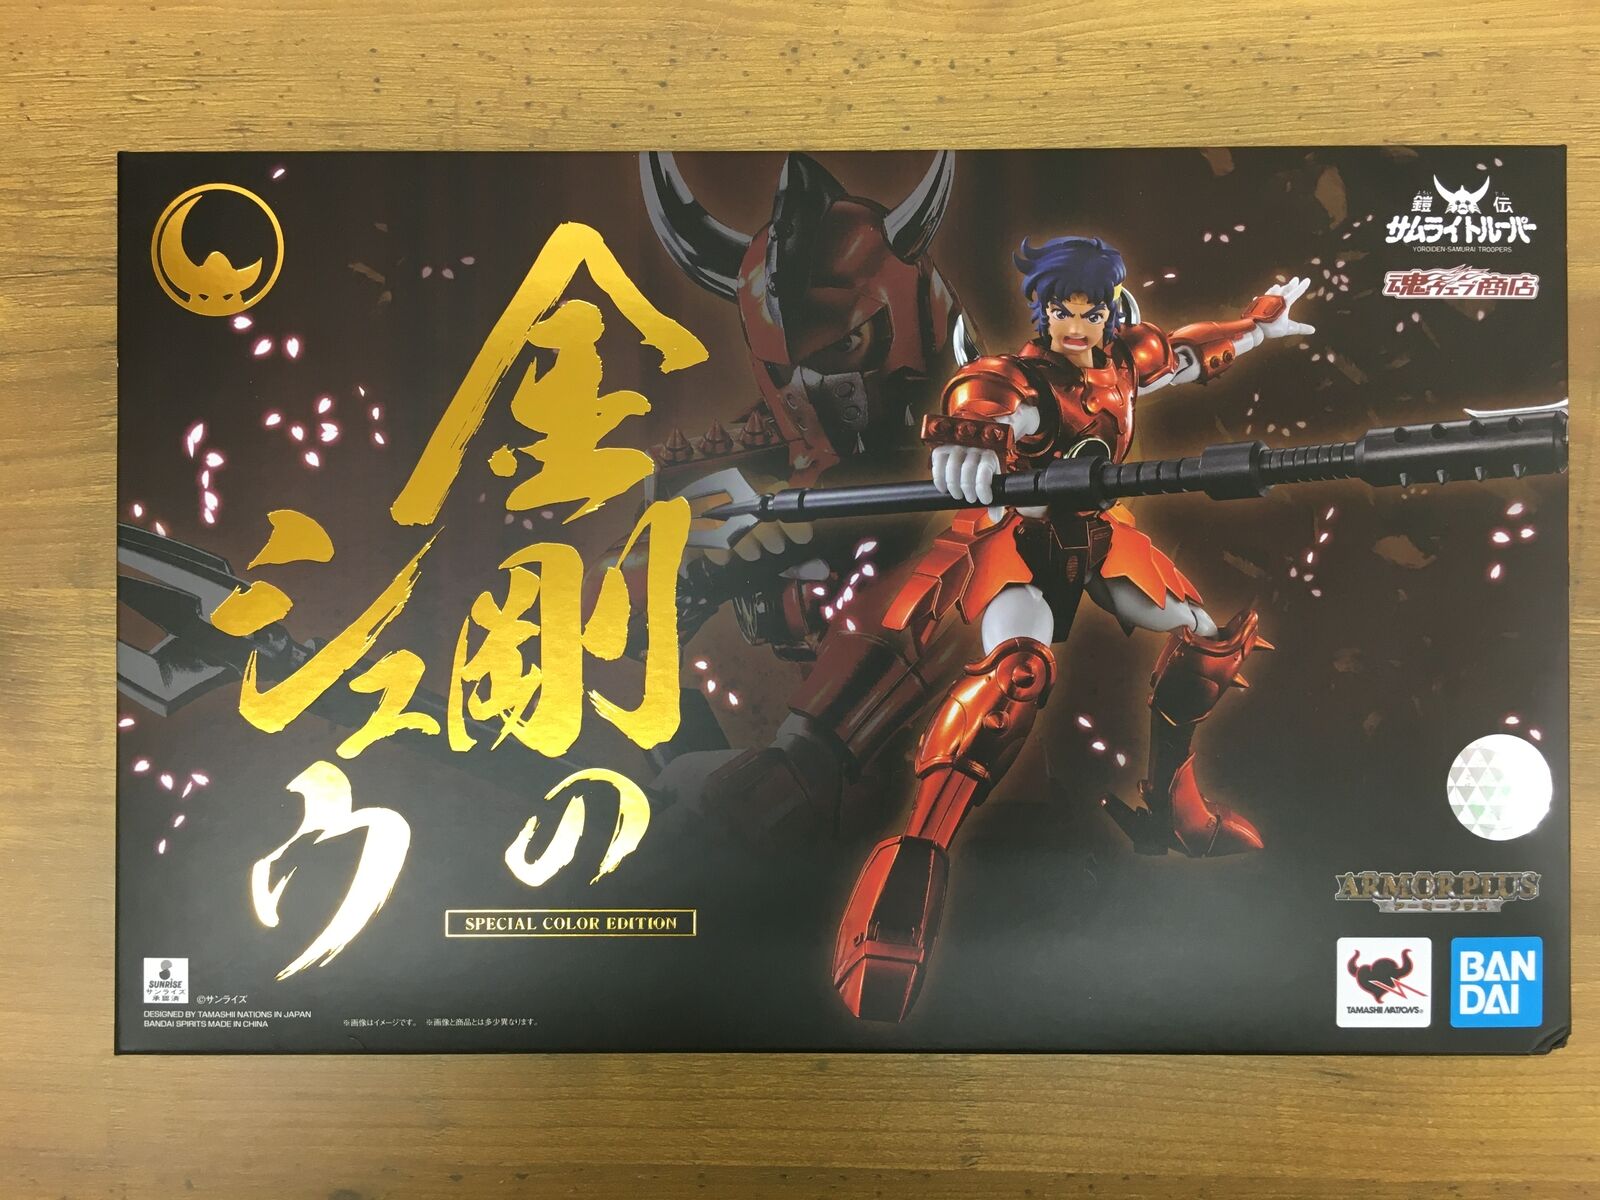 ARMOR PLUS RONIN WARRIORS Shu of the Stone SPECIAL COLOR EDITION BANDAI Japan